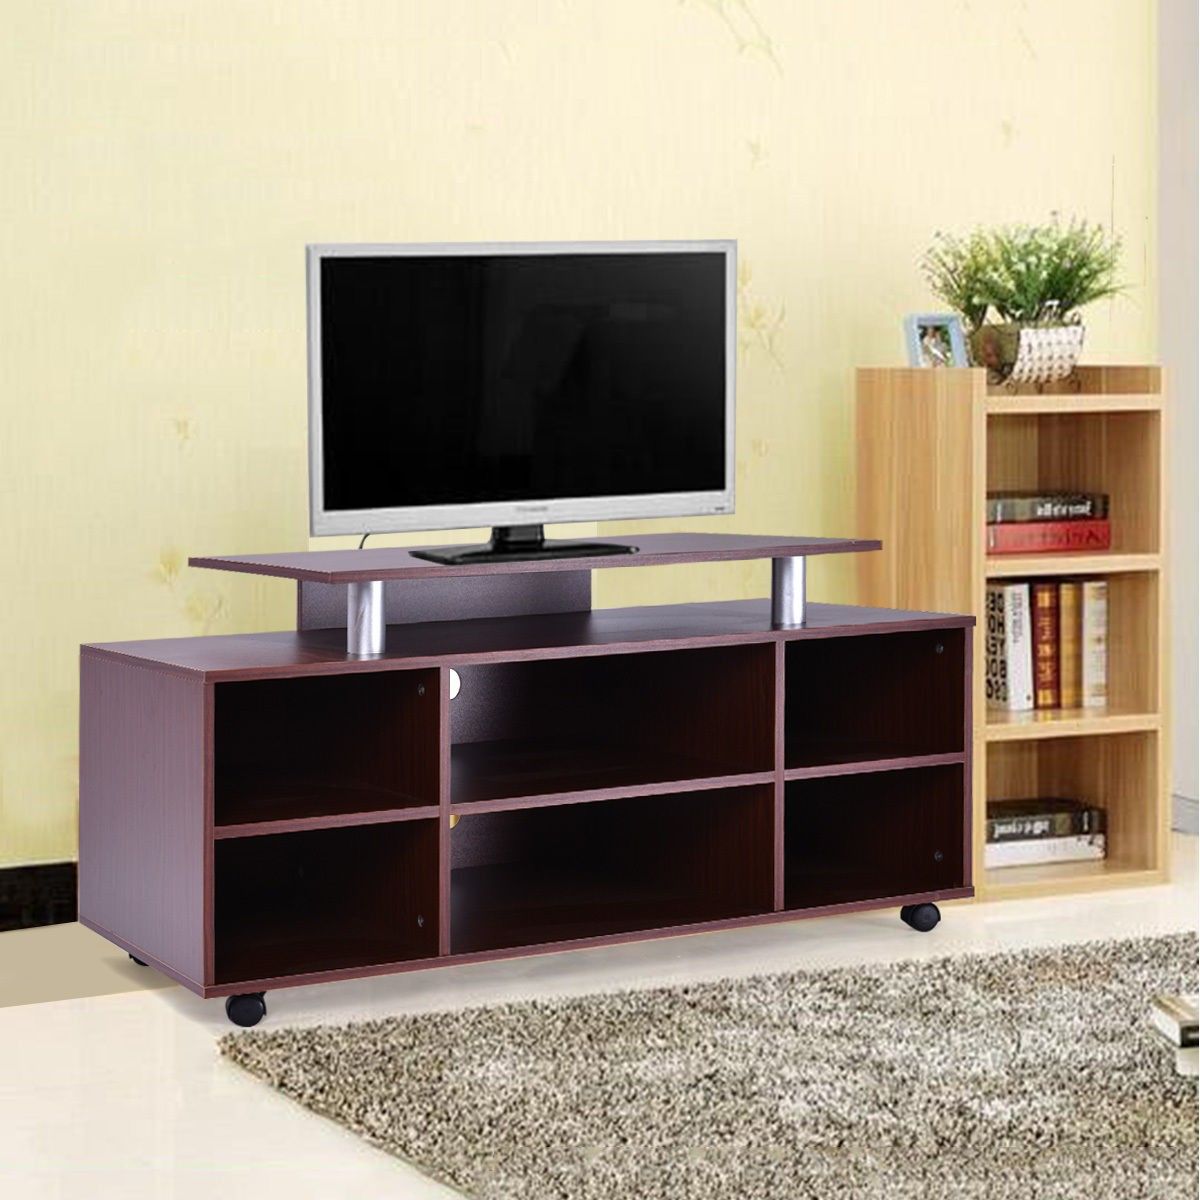 Wheeled Tv Stand Entertainment Center Media Console Regarding Tv Cabinets With Storage (View 1 of 15)